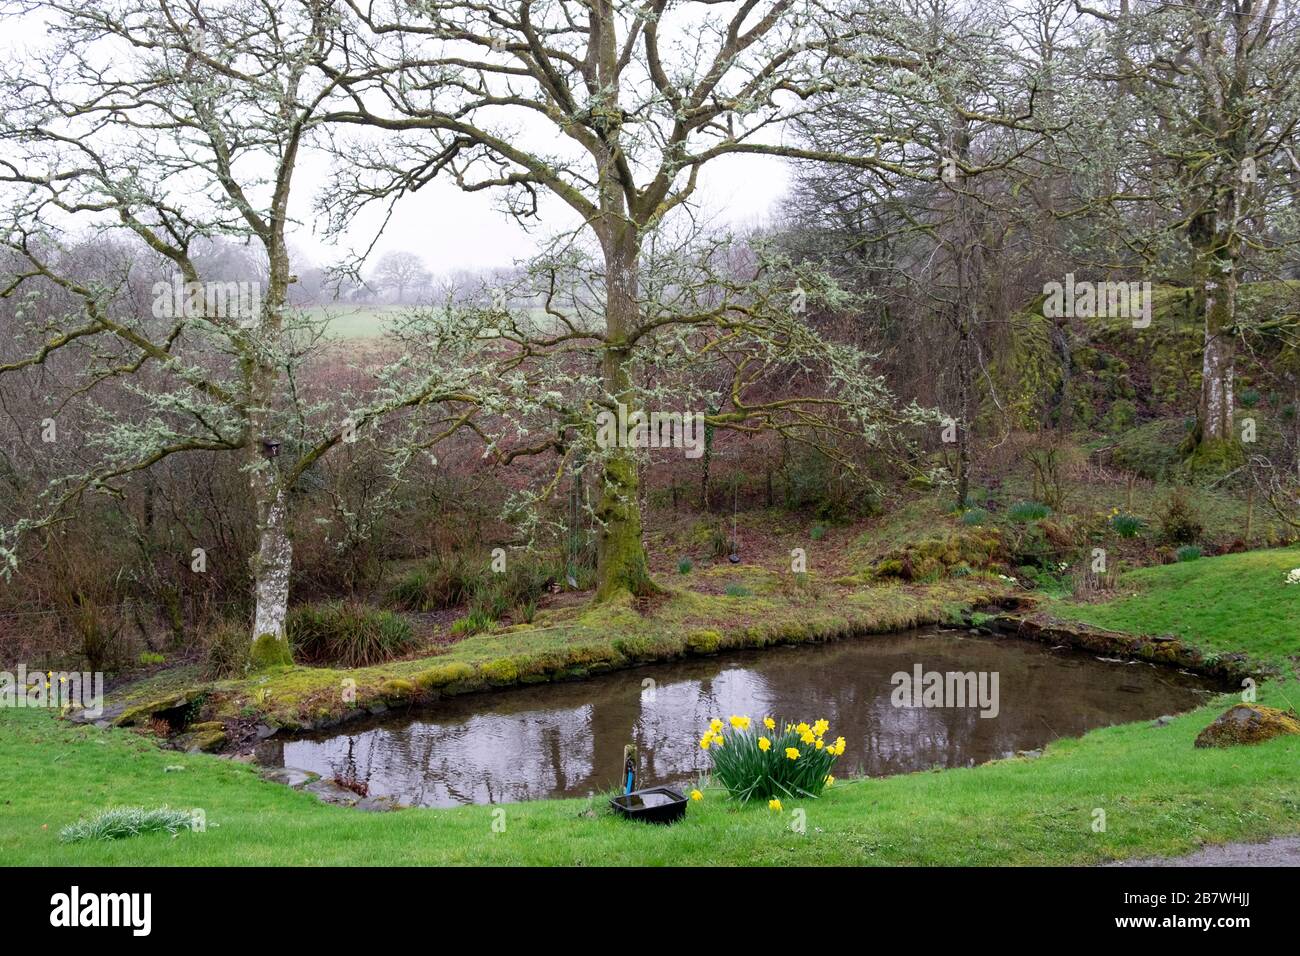 Garden pond pool in March 2020 in early spring landscape with clump of daffodils and lichen on oak trees in Carmarthenshire West Wales UK KATHY DEWITT Stock Photo